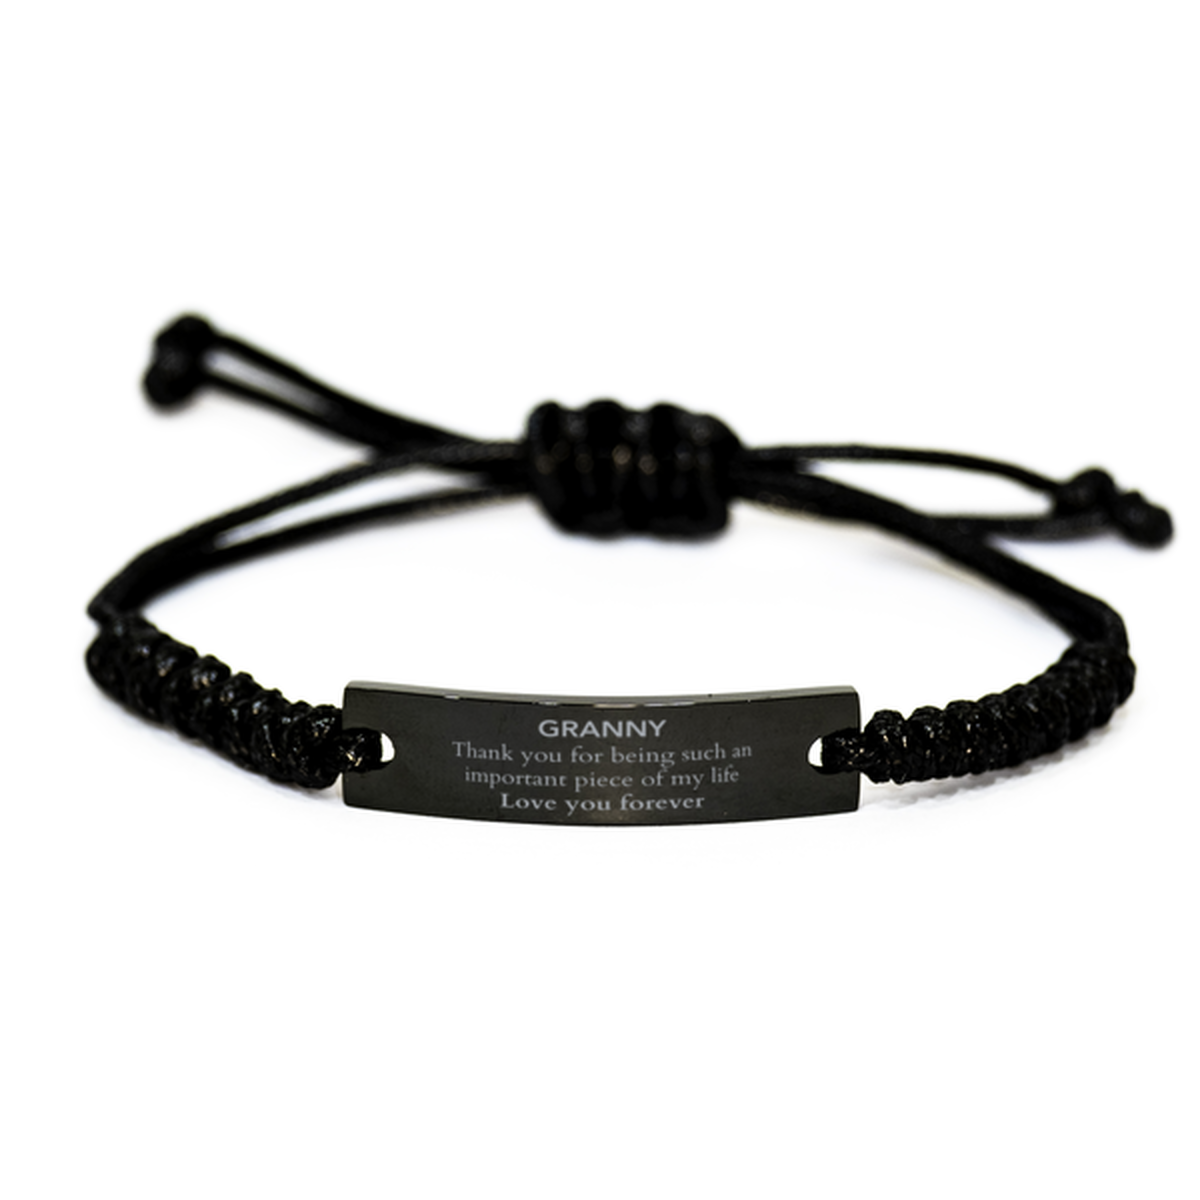 Appropriate Granny Black Rope Bracelet Epic Birthday Gifts for Granny Thank you for being such an important piece of my life Granny Christmas Mothers Fathers Day